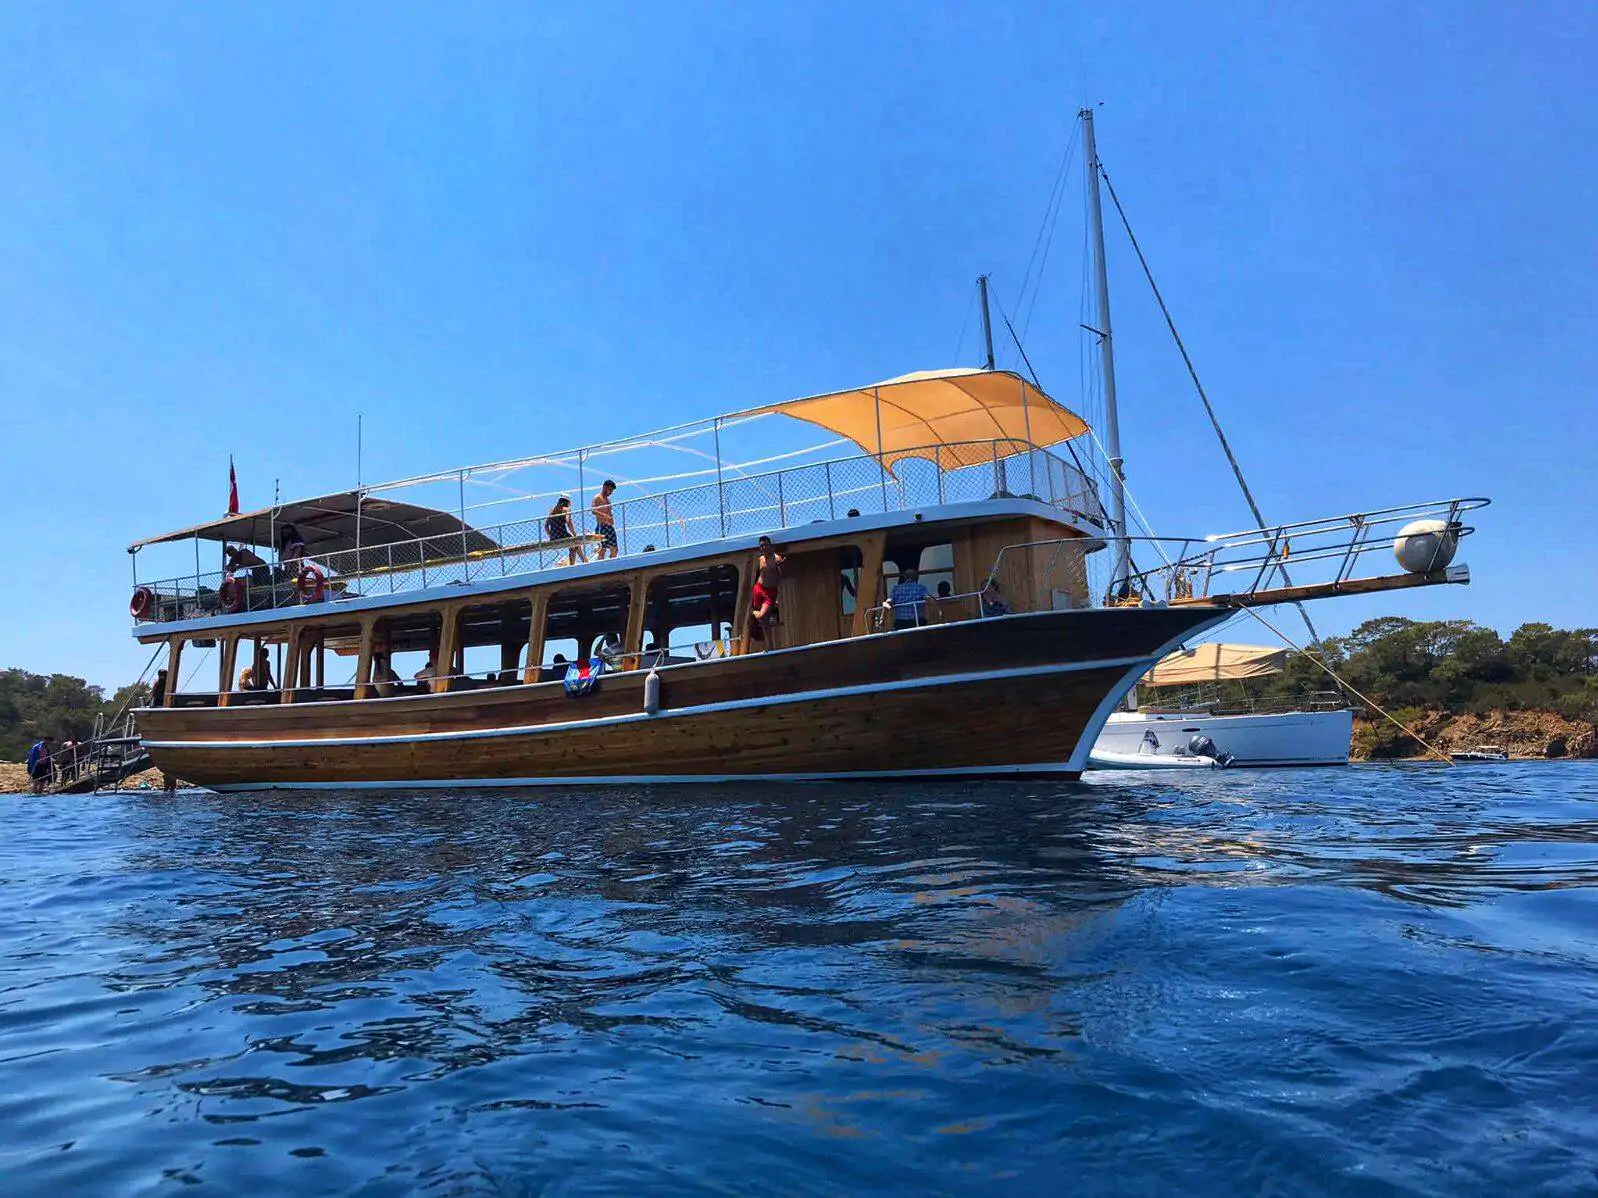 Fethiye Daily Swimming Charters - The Best Way to Spend a Day in Fethiye, Turkey